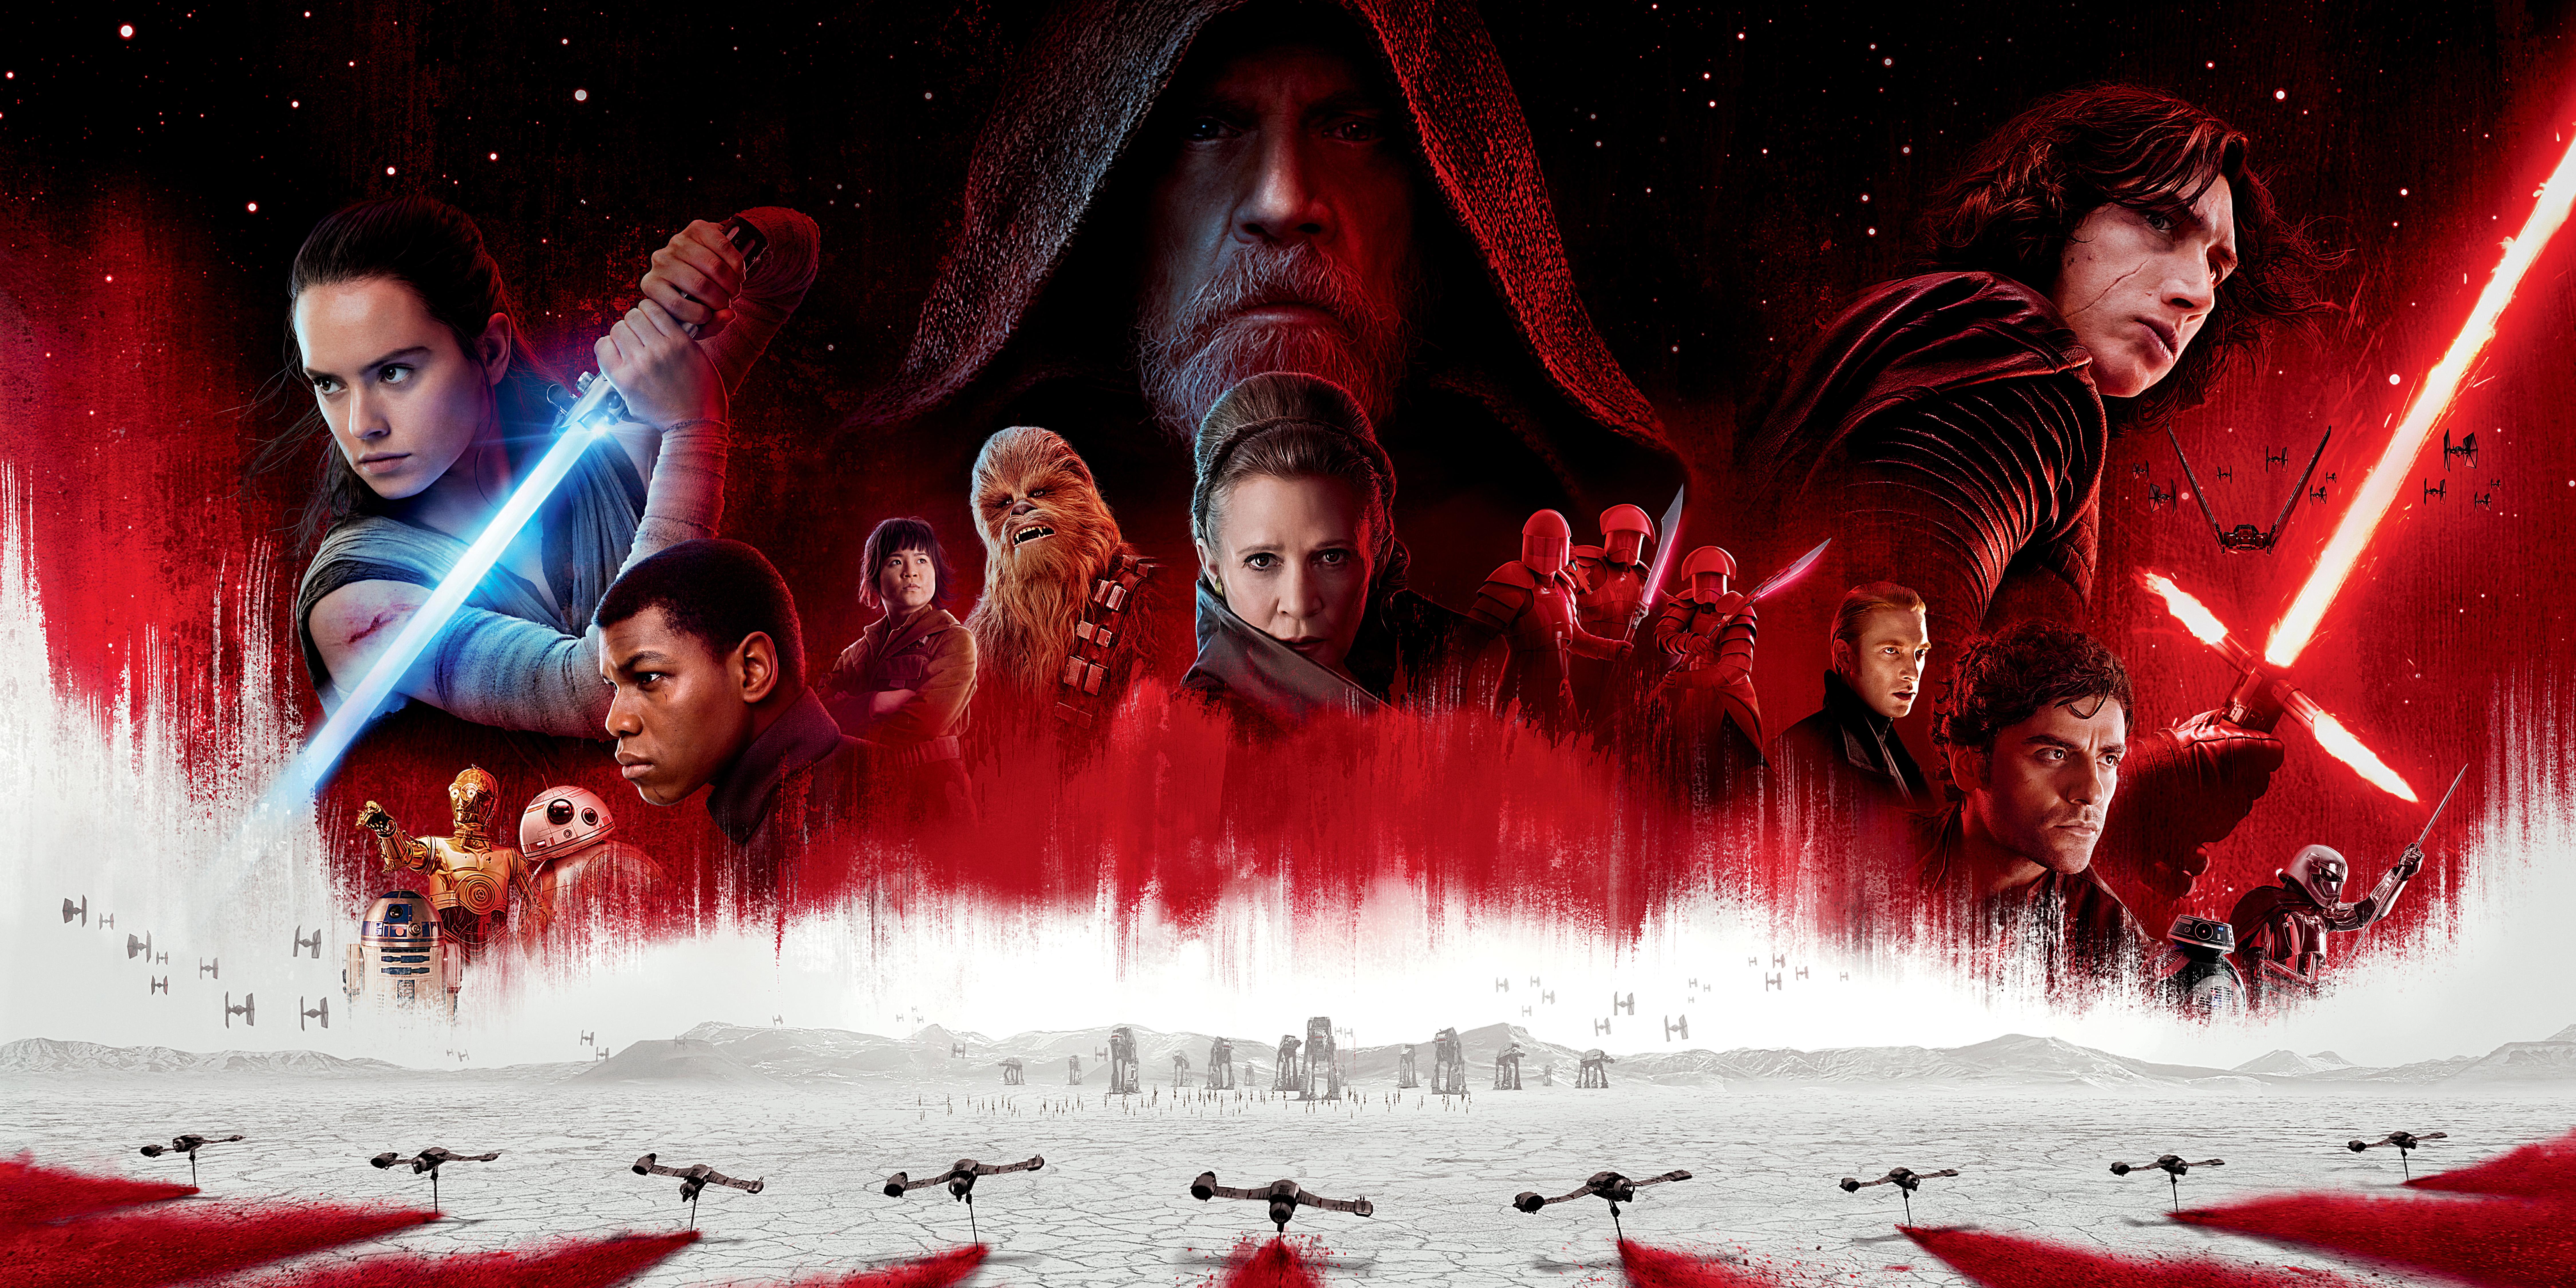 Why Do So Many 'Star Wars' Fans Hate 'The Last Jedi'?